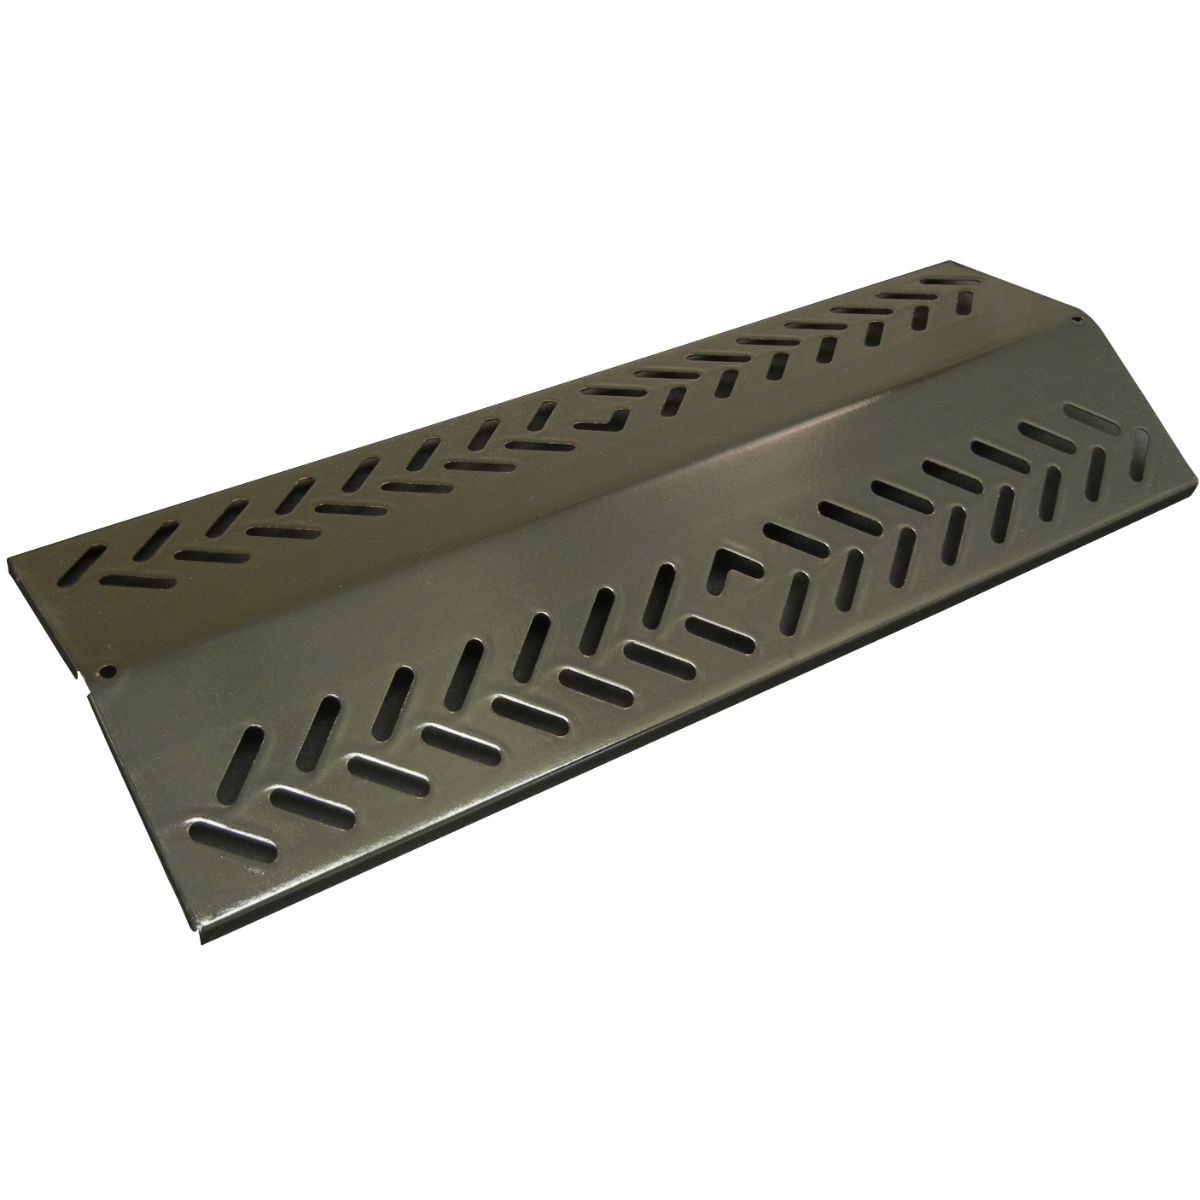 Porcelain steel heat plate for Broil-Mate, Grill Pro, Sterling brand gas grills